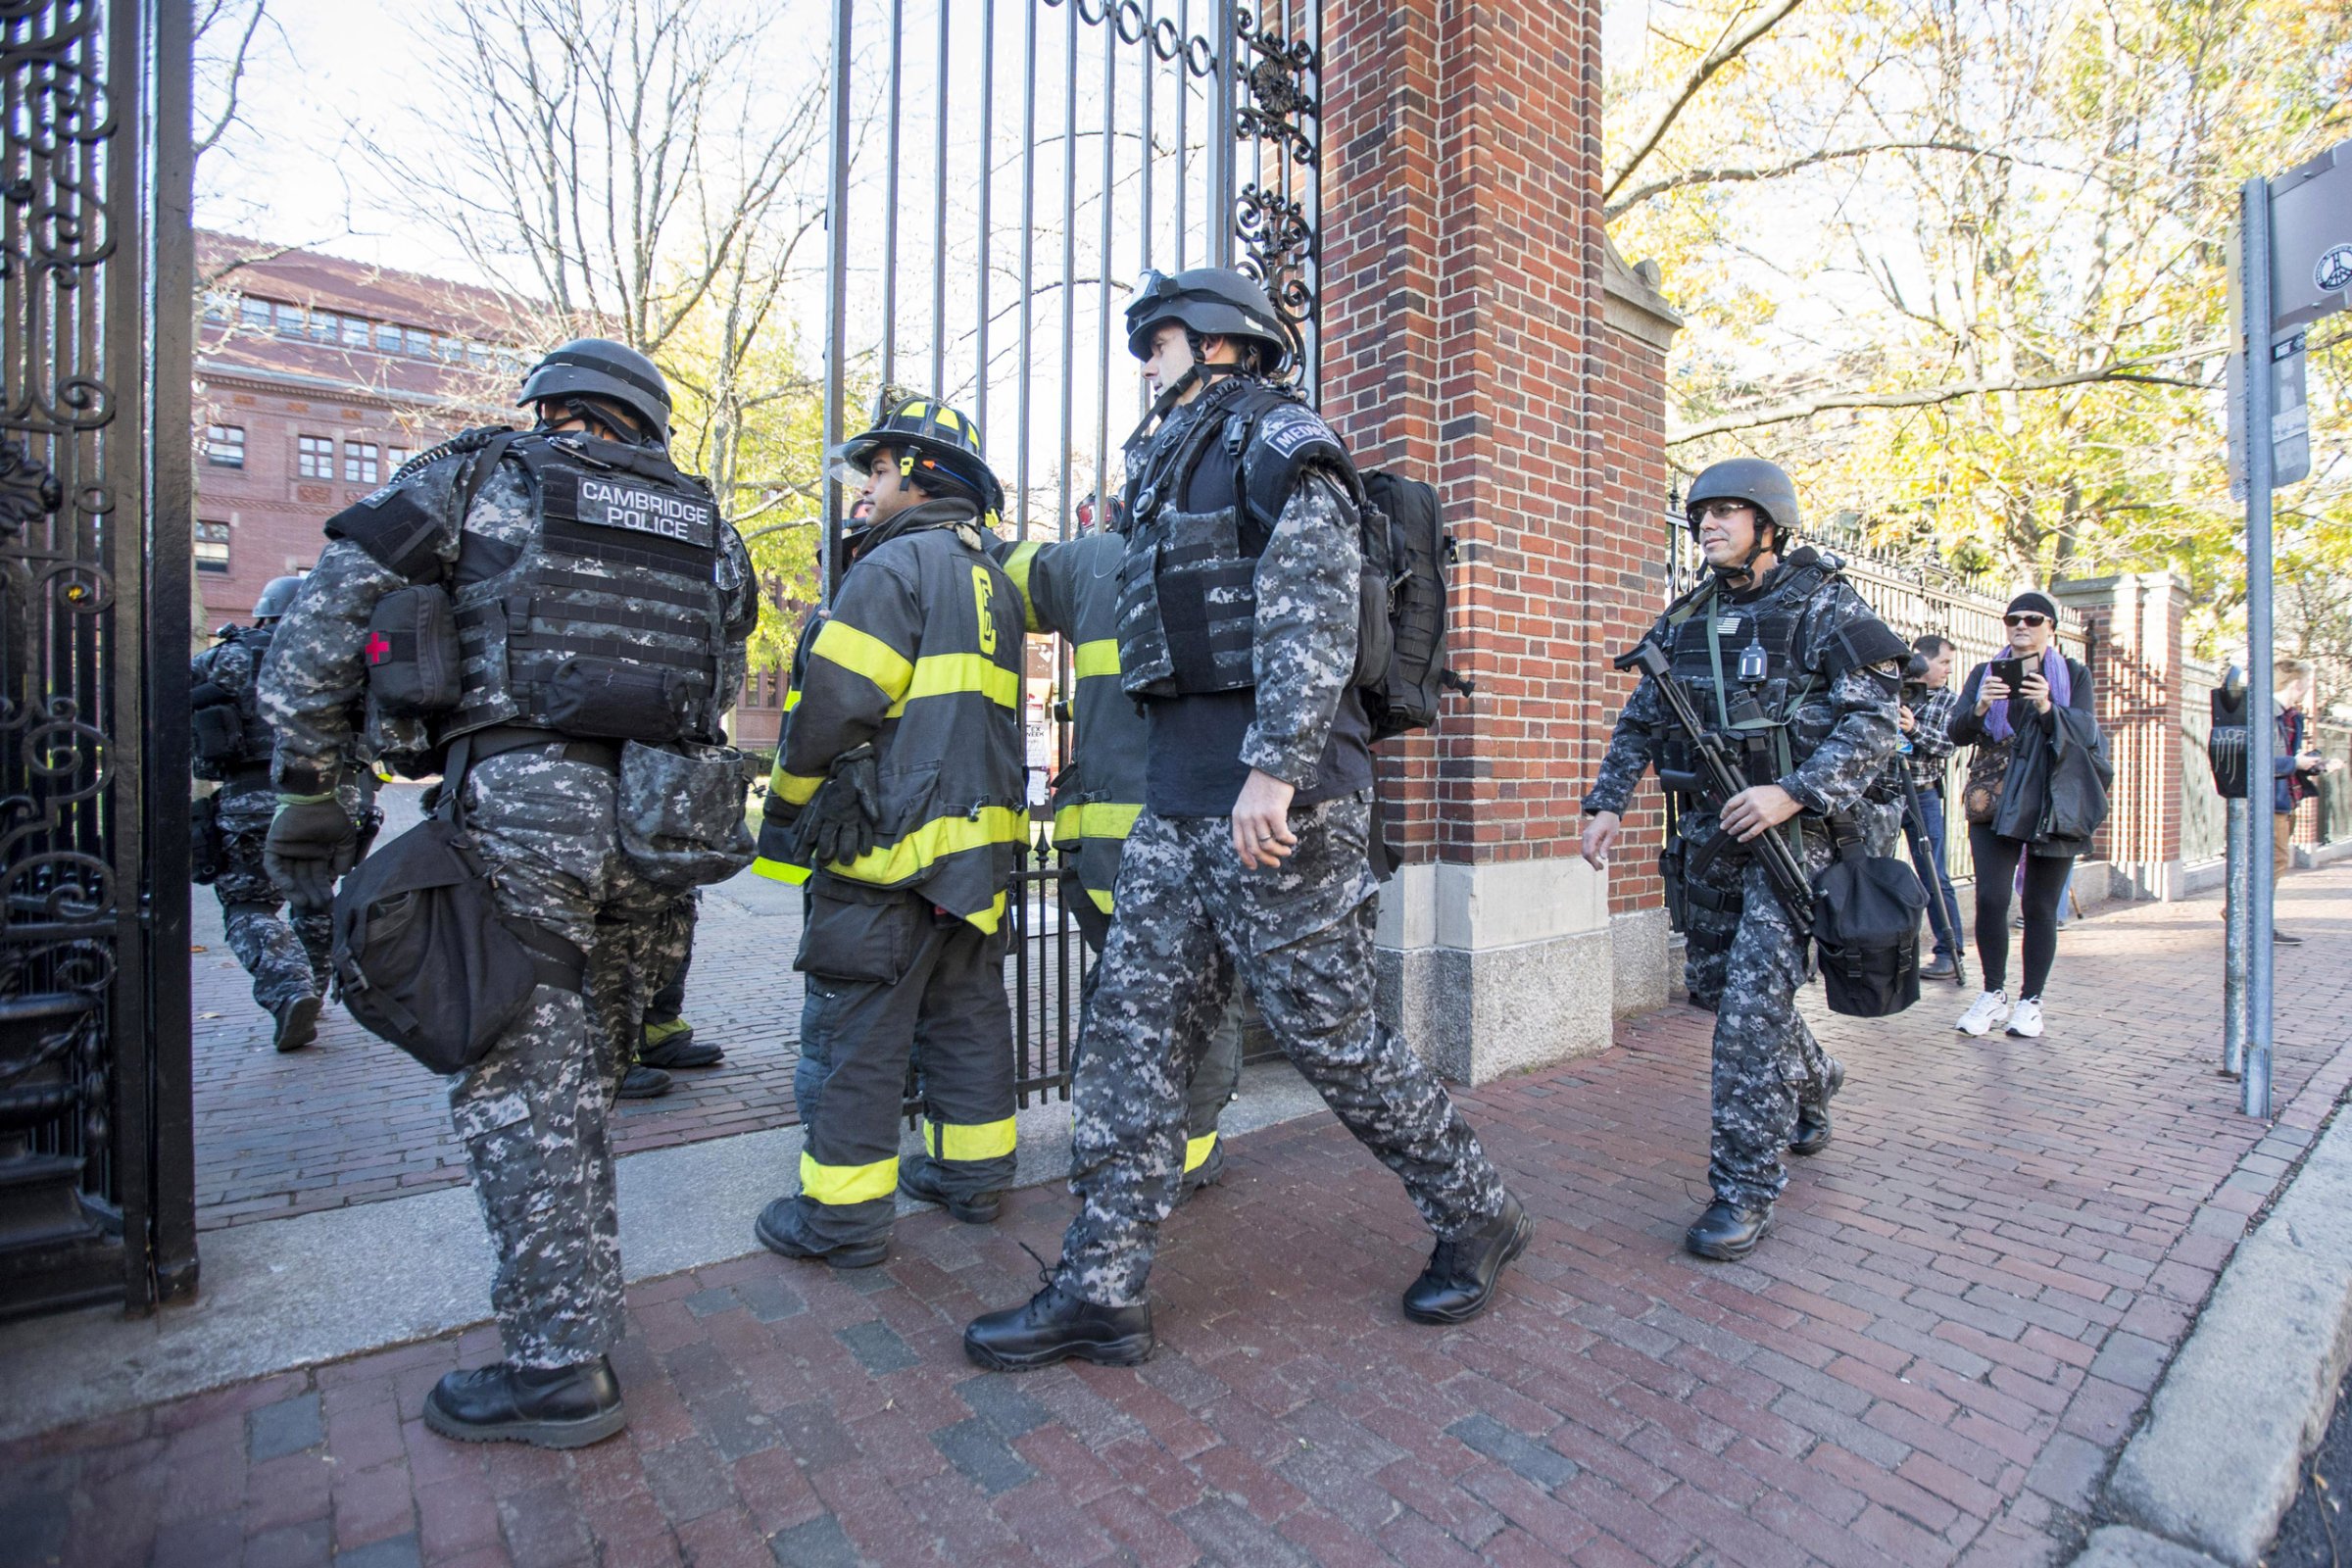 CAMBRIDGE, MA - NOVEMBER 16: Cambridge Police SWAT team members arrive at Harvard Yard following a bomb threat that was made on campus on November 16, 2015 in Cambridge, Massachusetts. Multiple buildings were evacuated and the Harvard Yard was shut down so that authorities could search. (Photo by Scott Eisen/Getty Images)